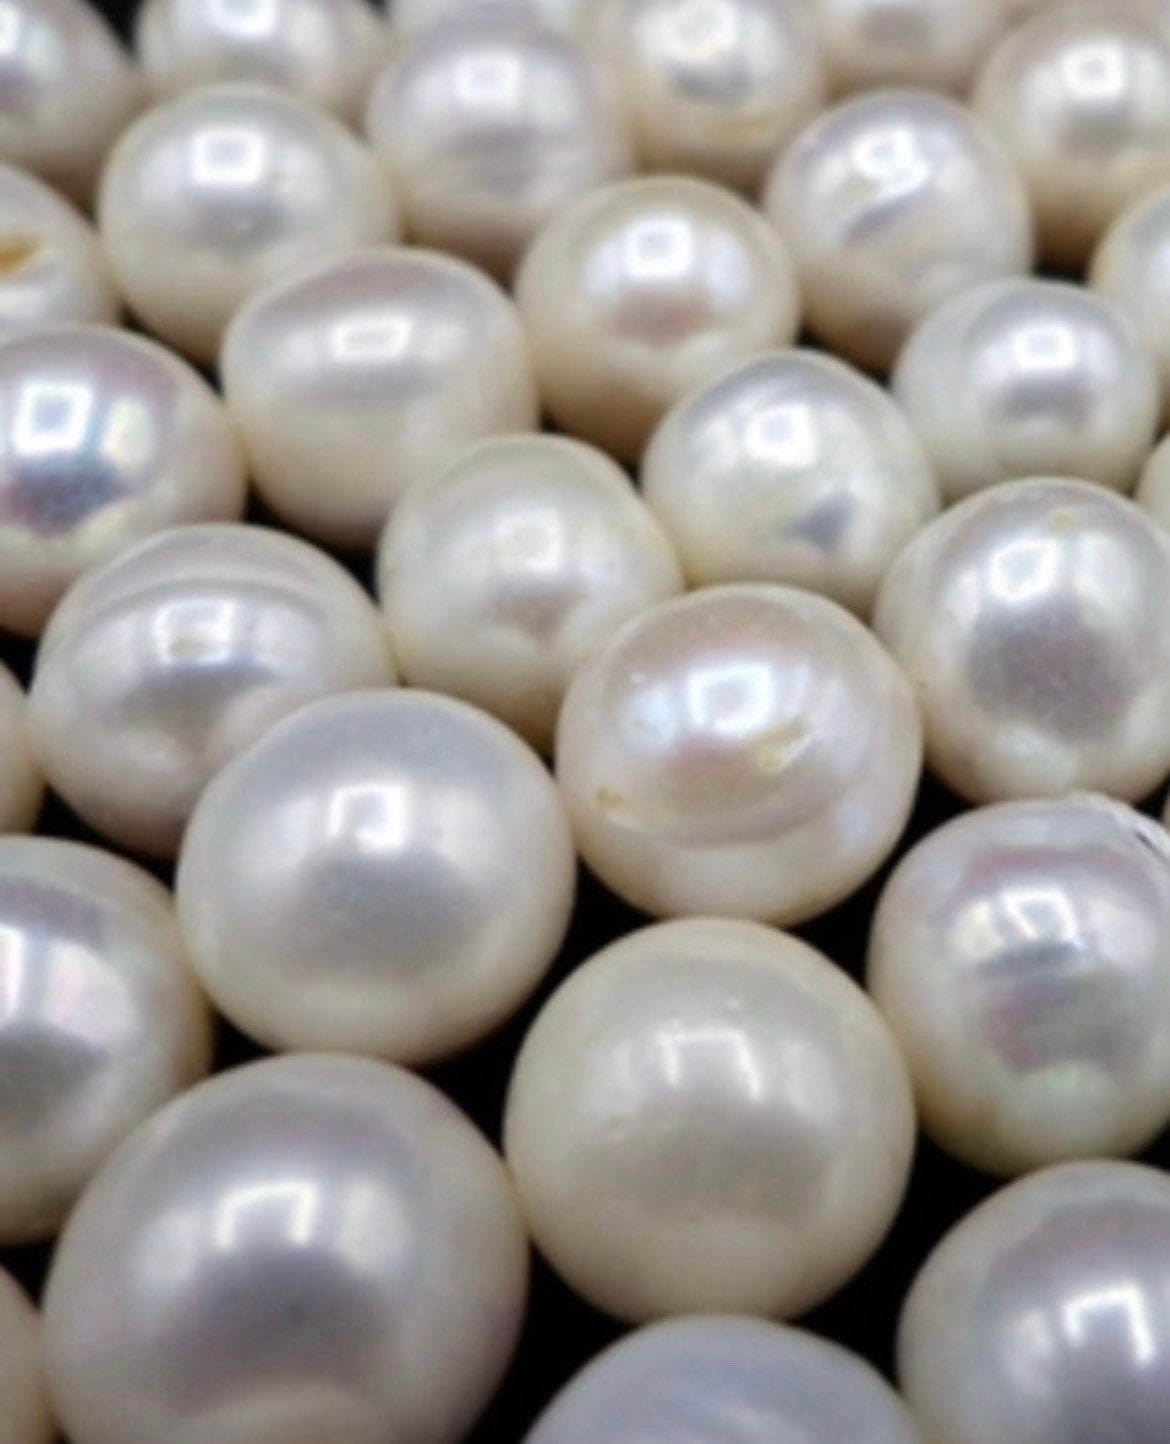 Hot Fashion 4mm 6mm 8mm 10mm Round Imitation Pearl Beads Random Mix Colors  Pearl Beads for jewelry Making YKL0086